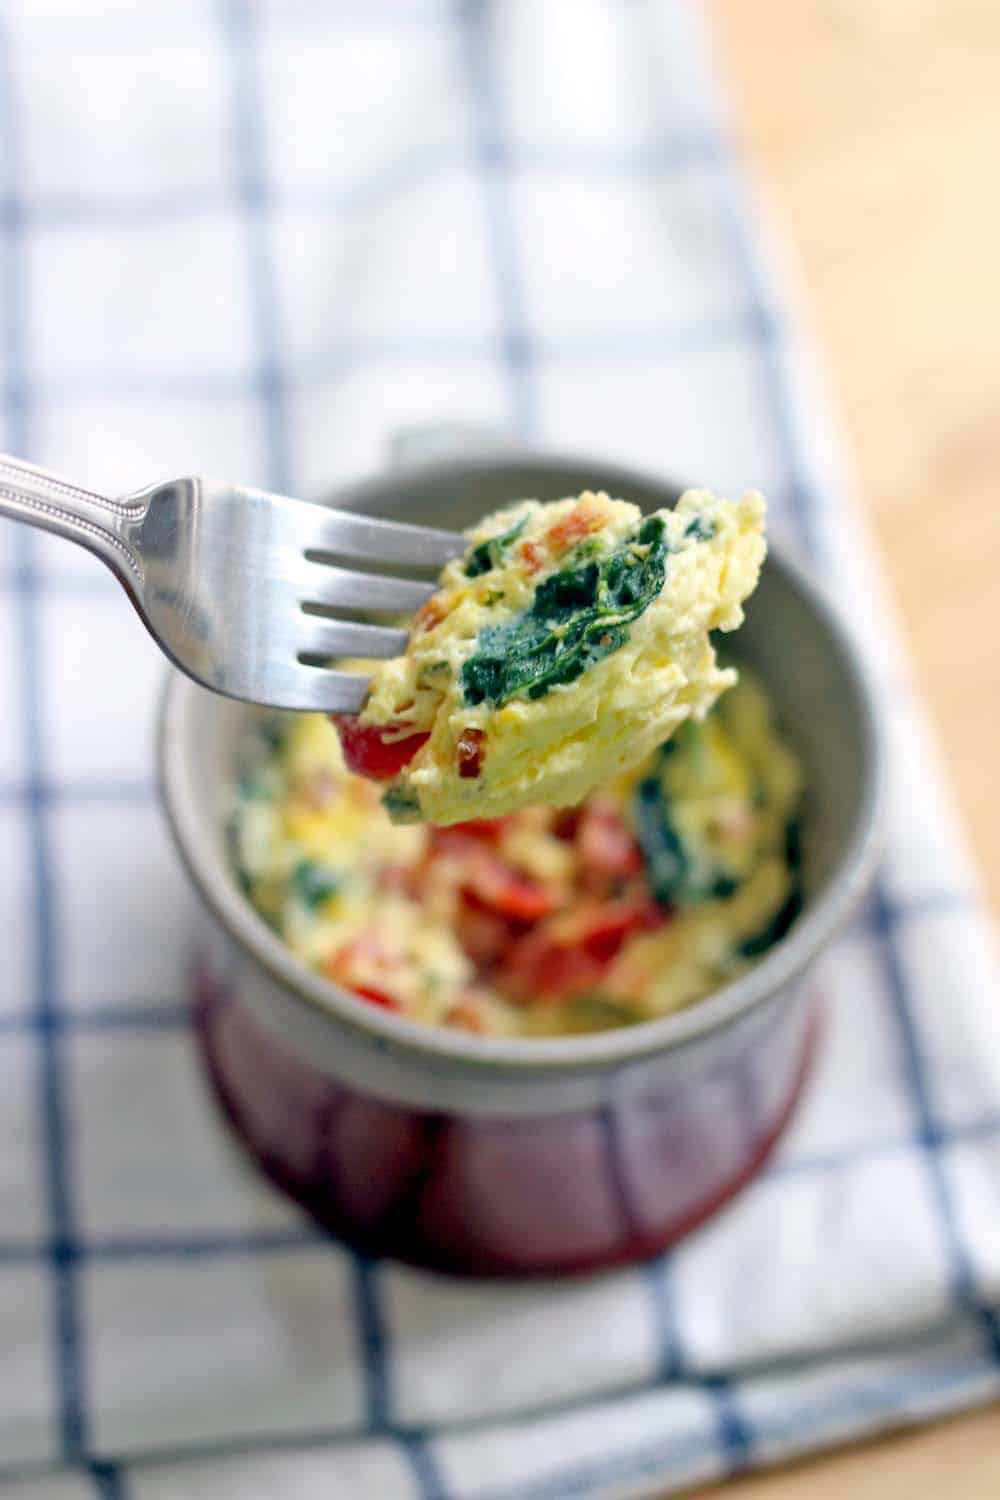 A fork lifts a bite of Five Minute Spinach and Cheddar Microwave Quiche in a Mug up from a blurred-out mug.